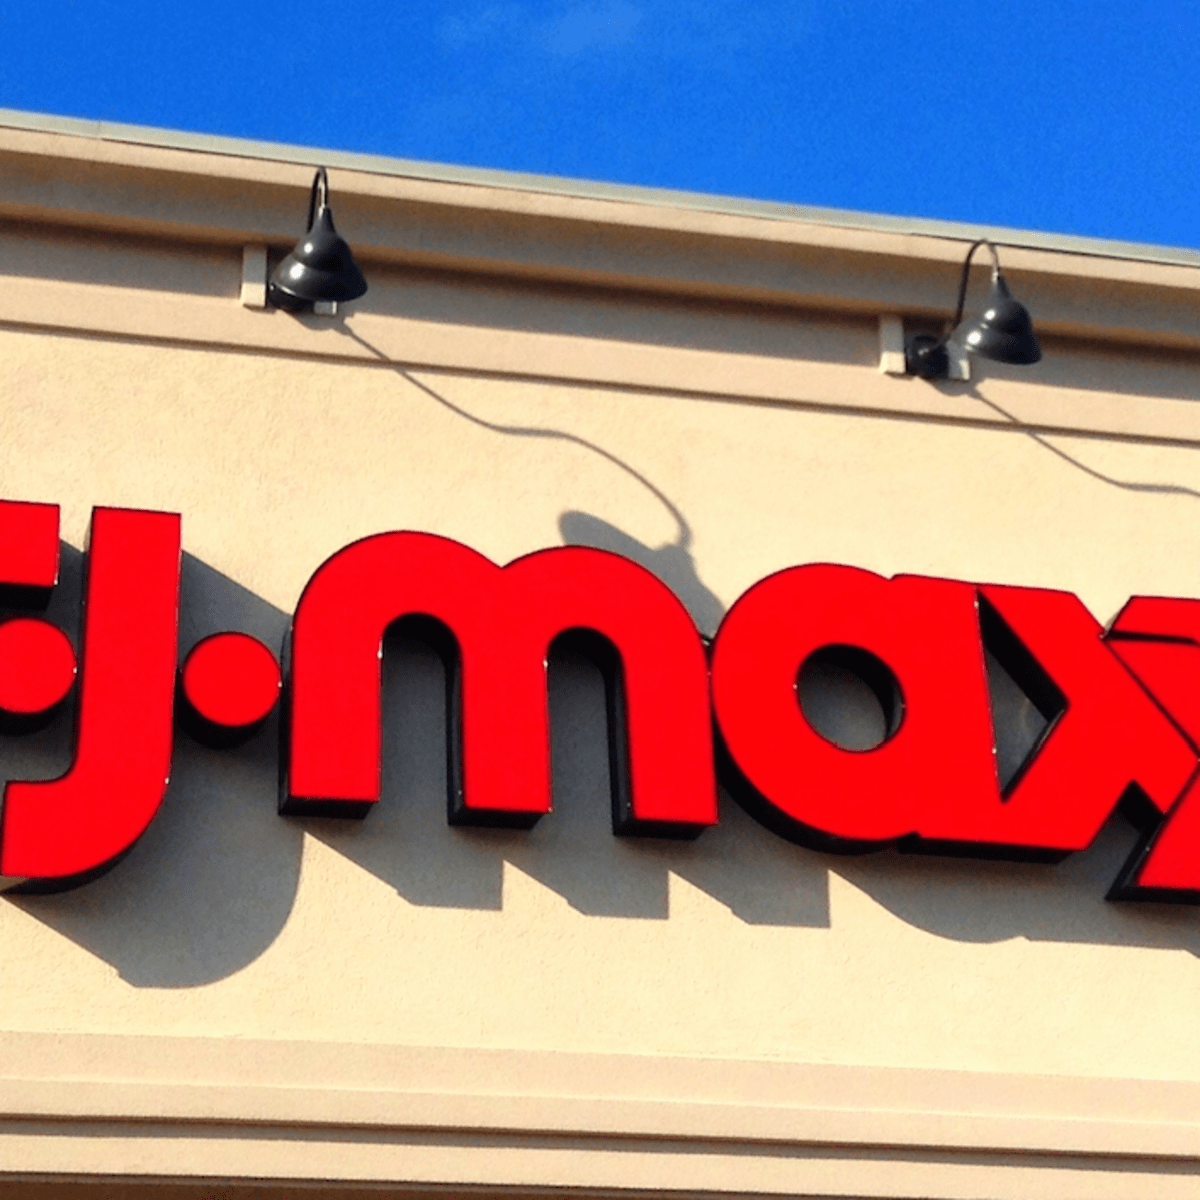 New T.J. Maxx to open in the Twin Cities this month - Bring Me The